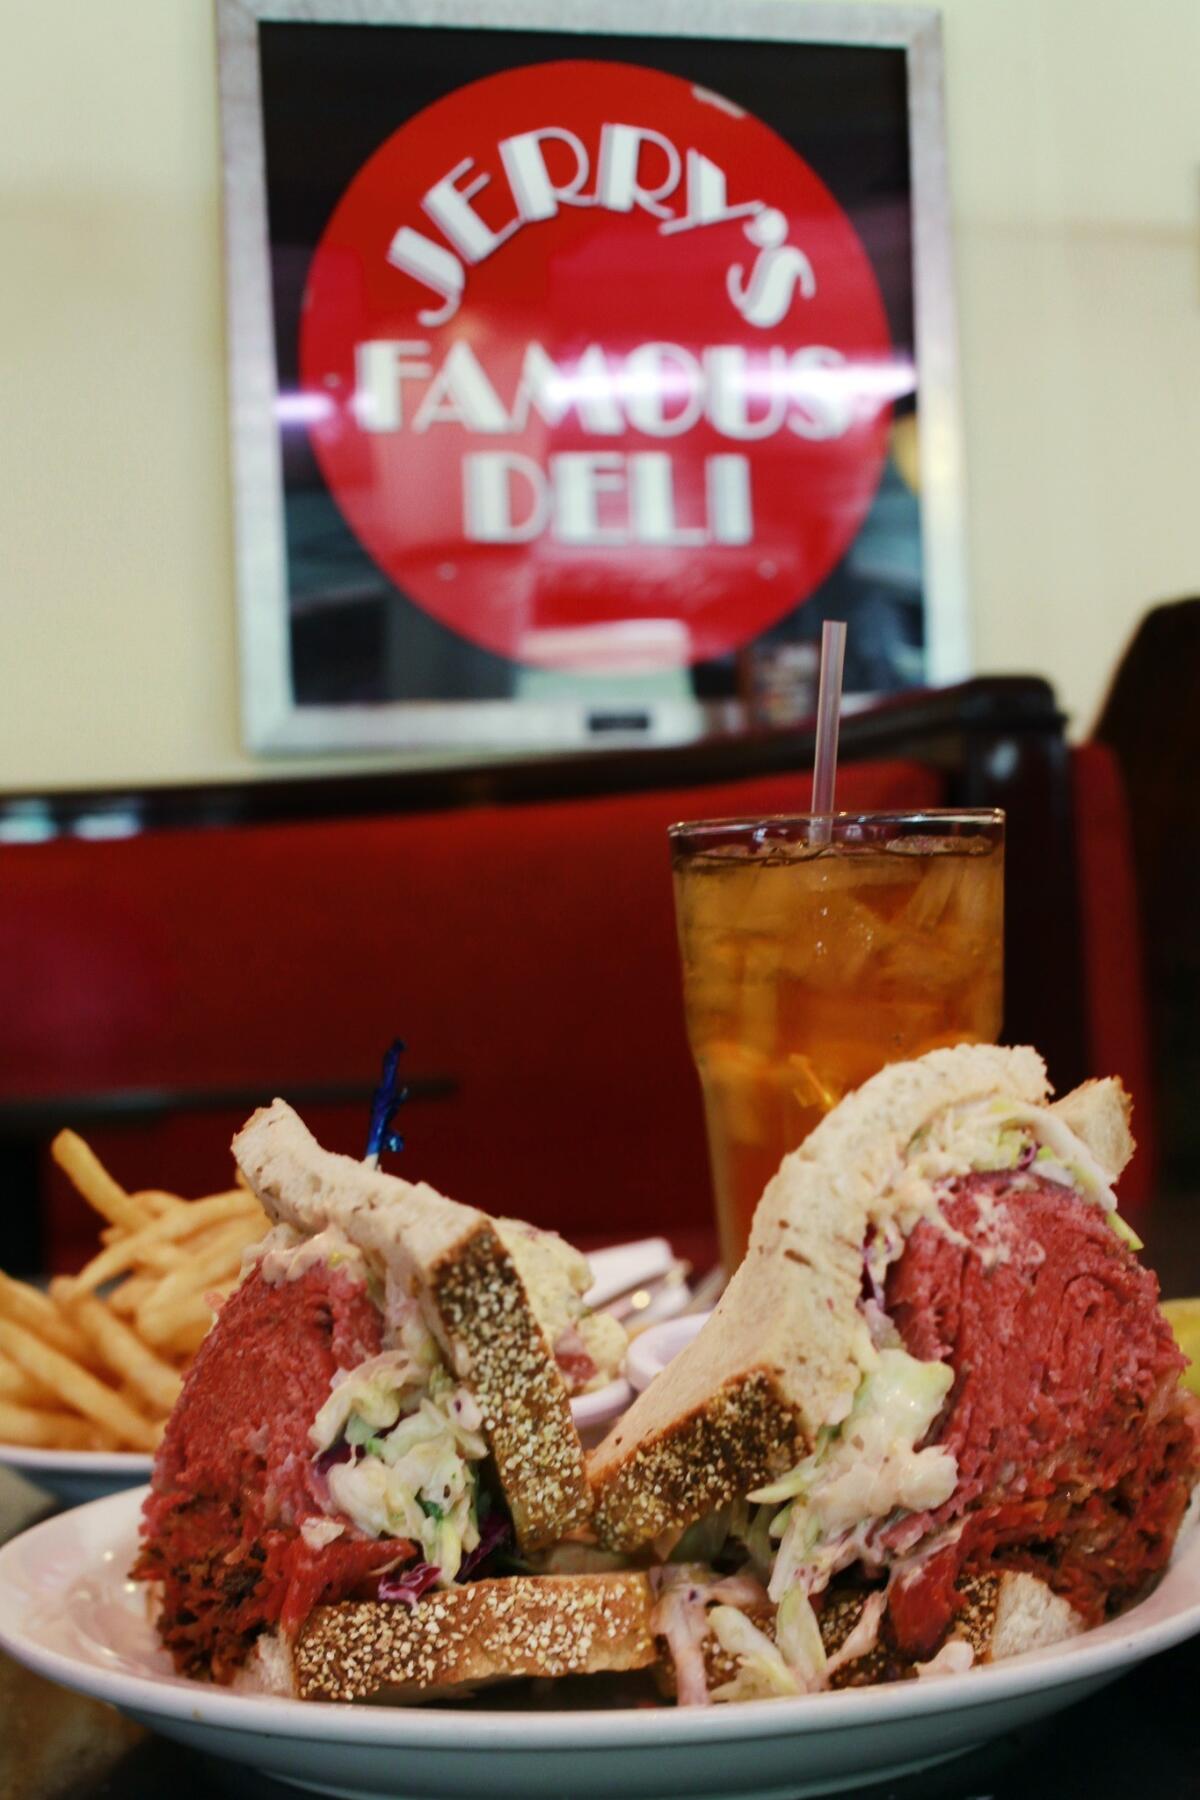 The "Mile High" corned beef sandwich at Jerry's Famous Deli.